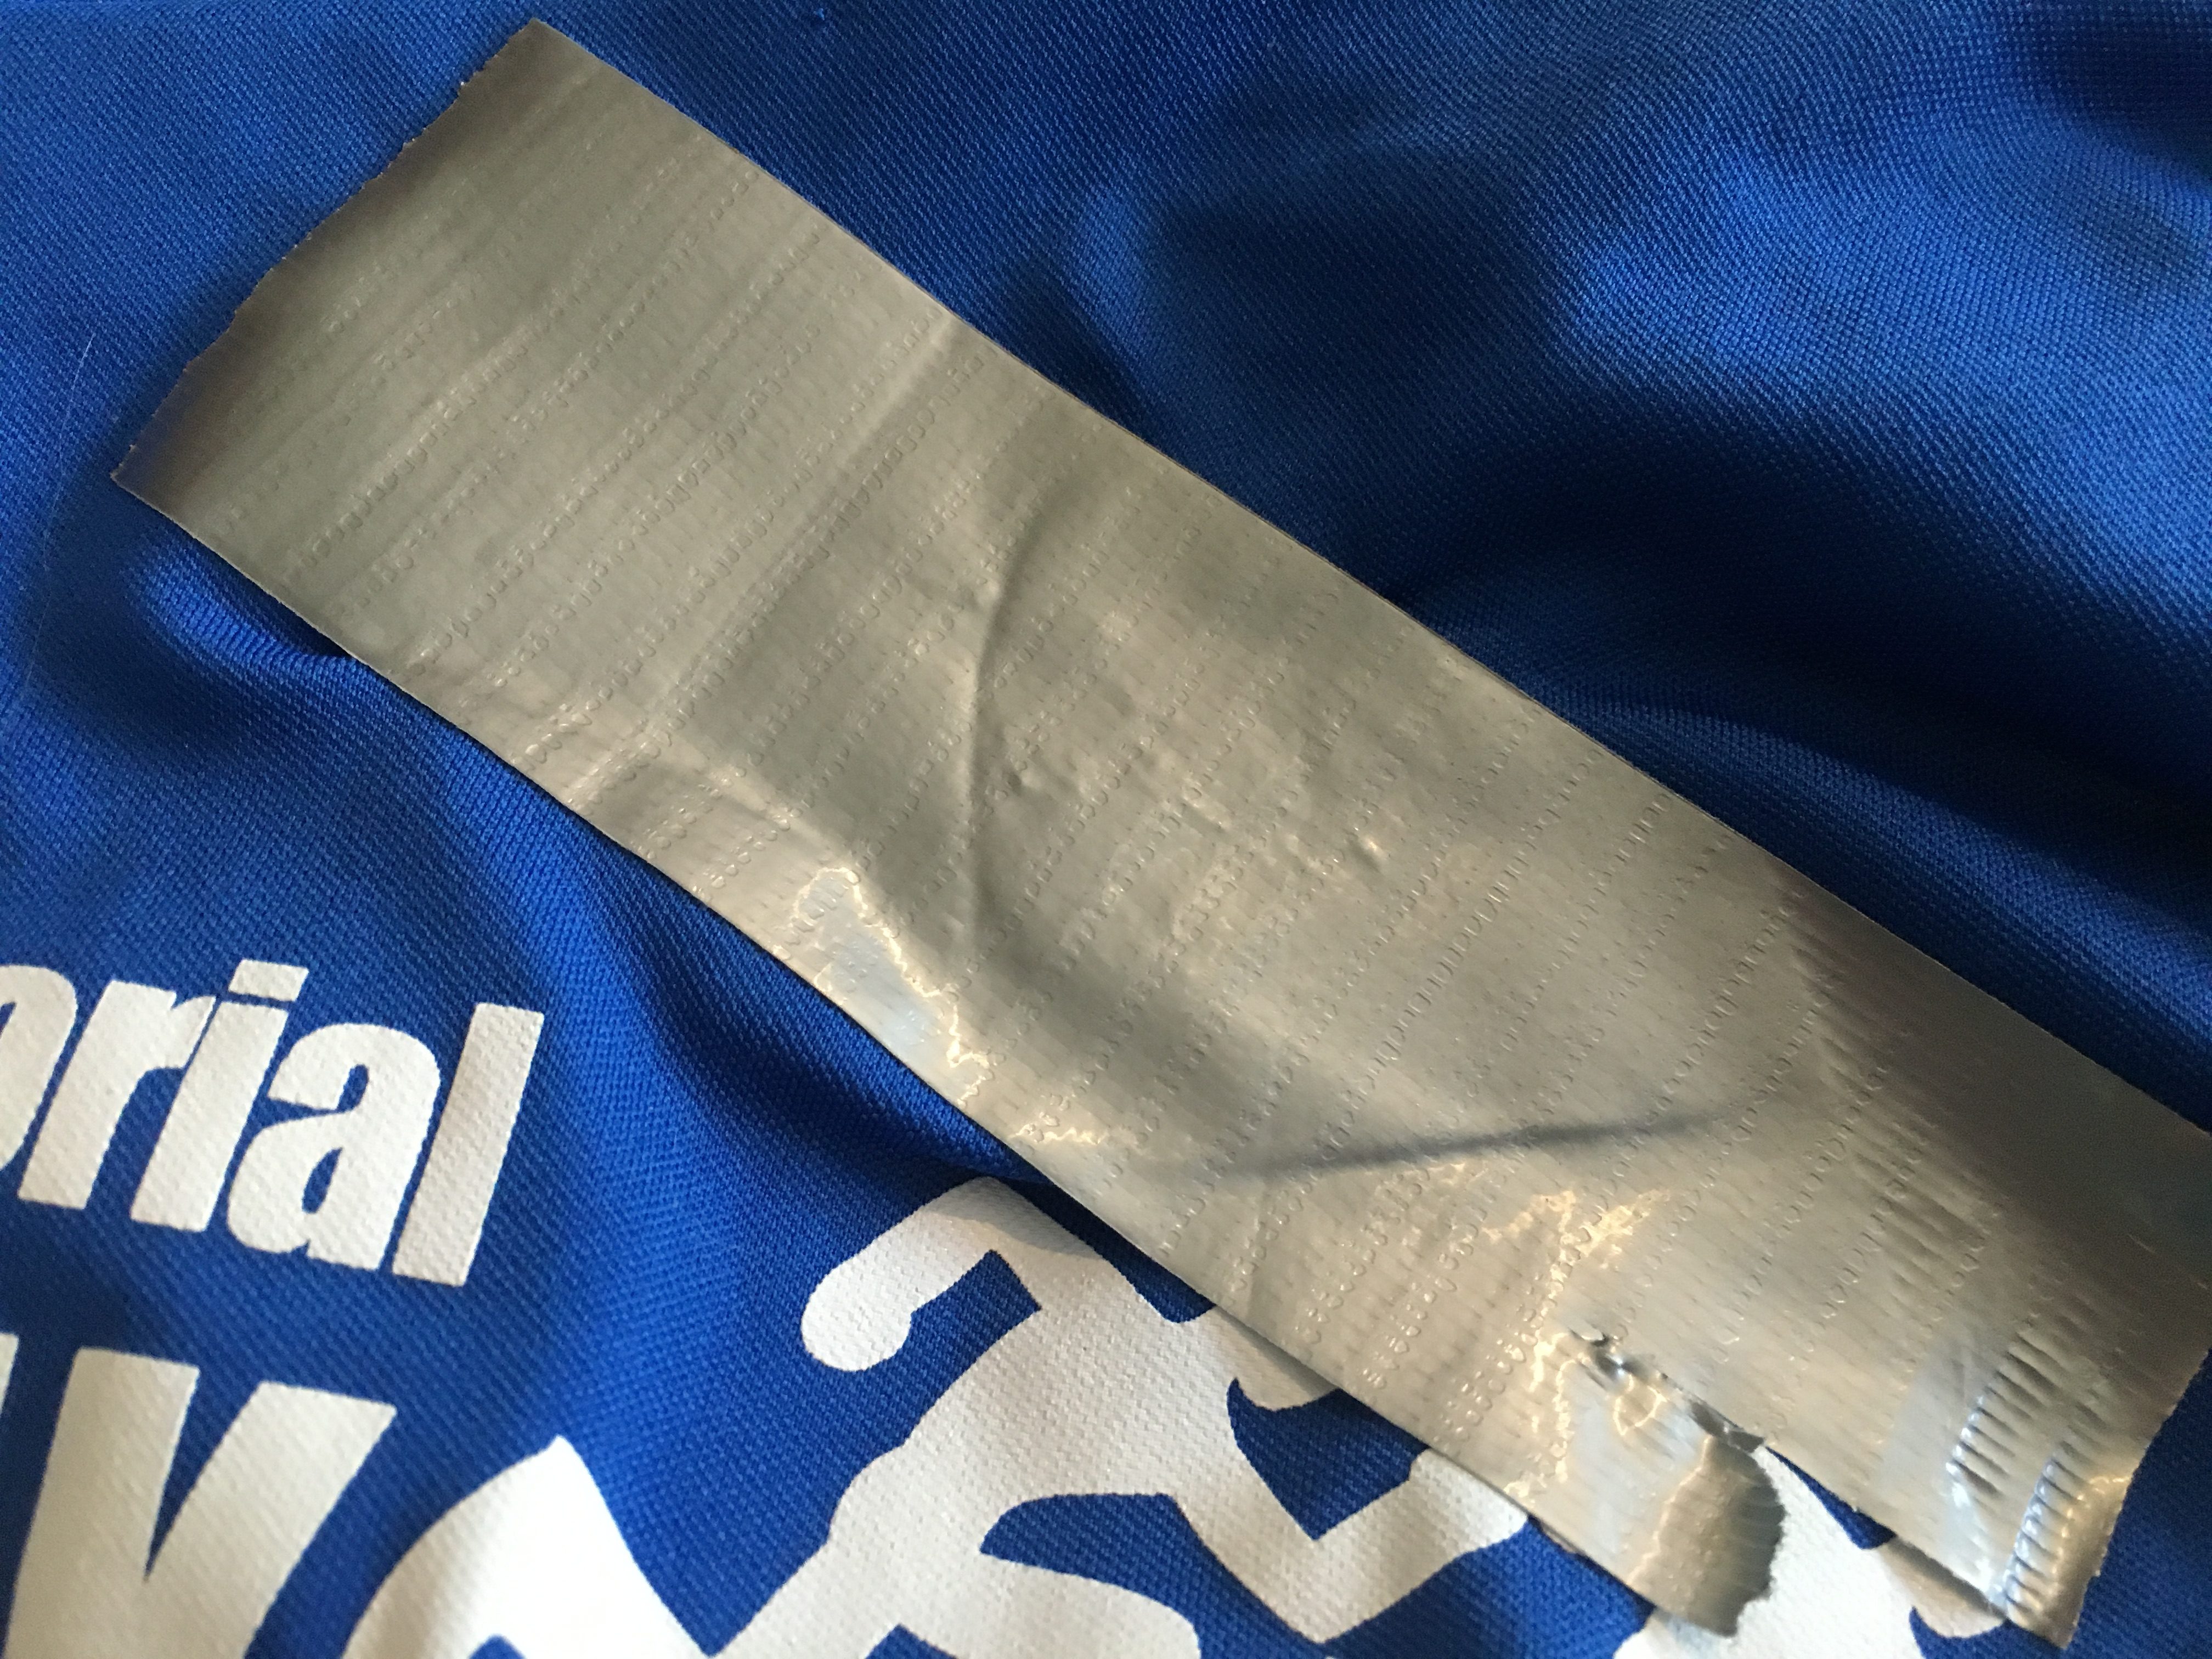 Removing sticker residue from shirt